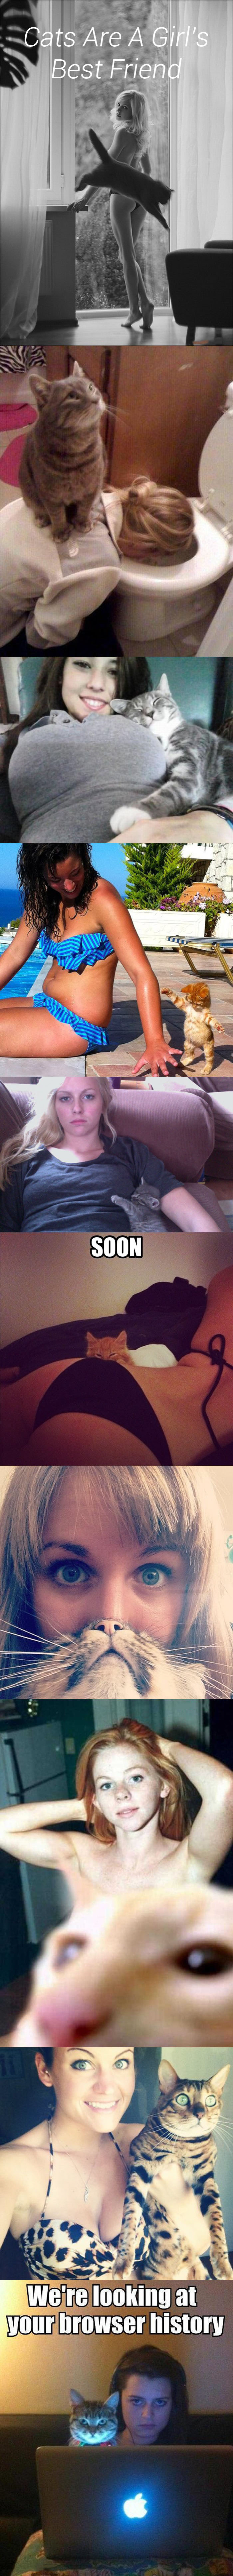 women and cats, compilation, lol, sexy